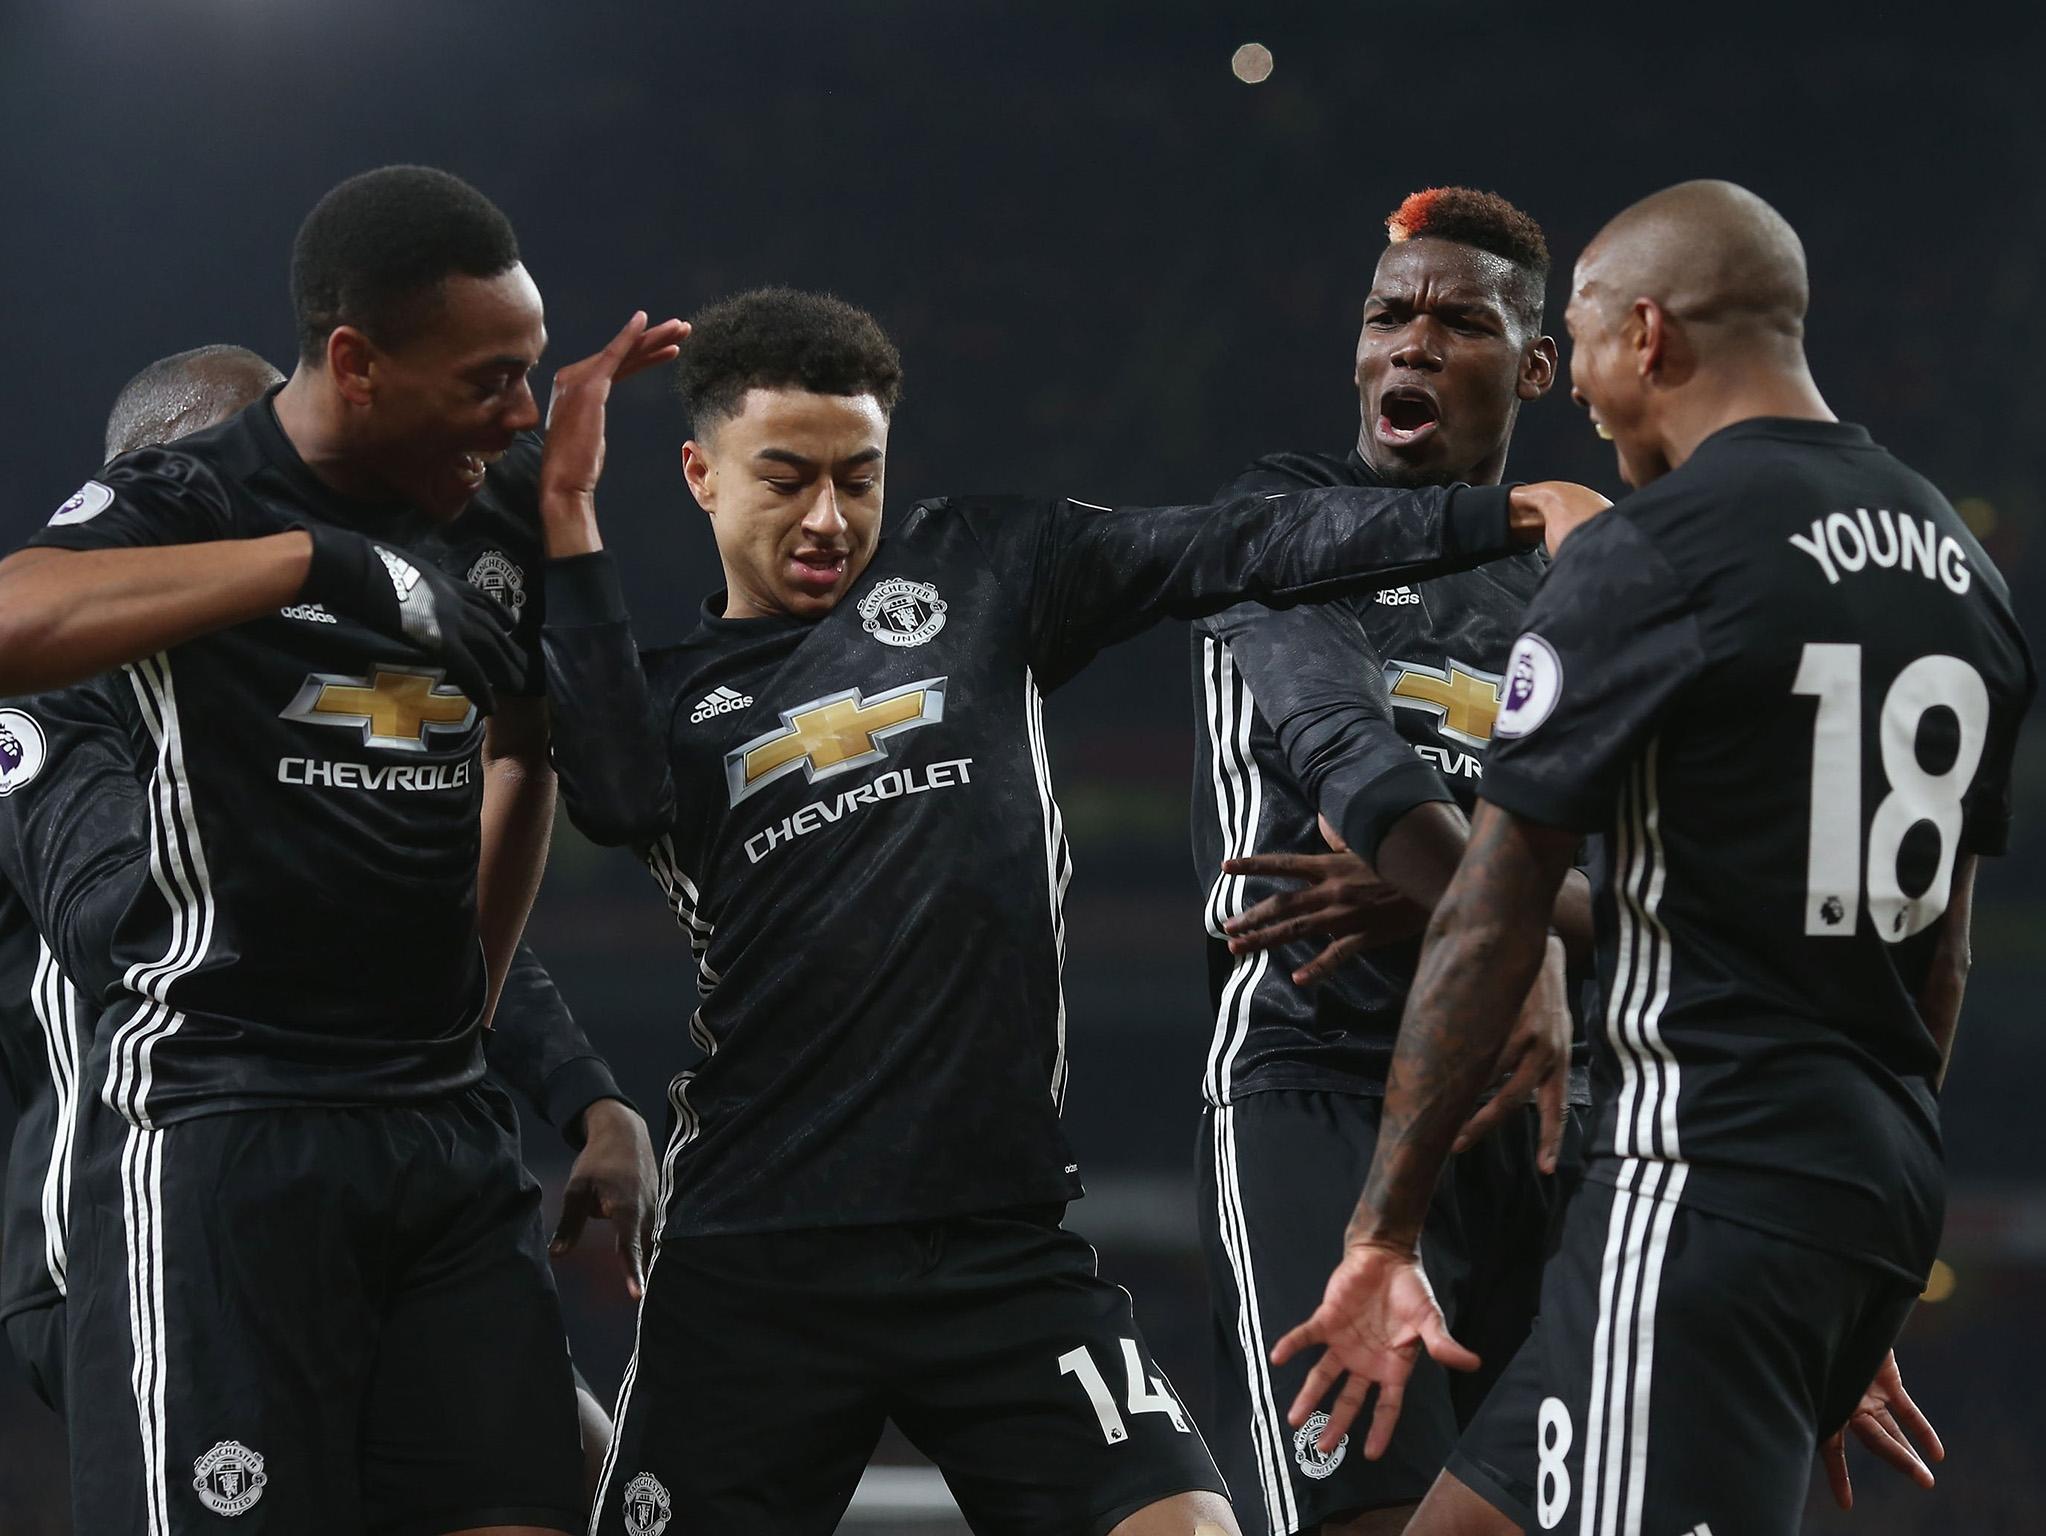 Lingard scored two in the thrilling win